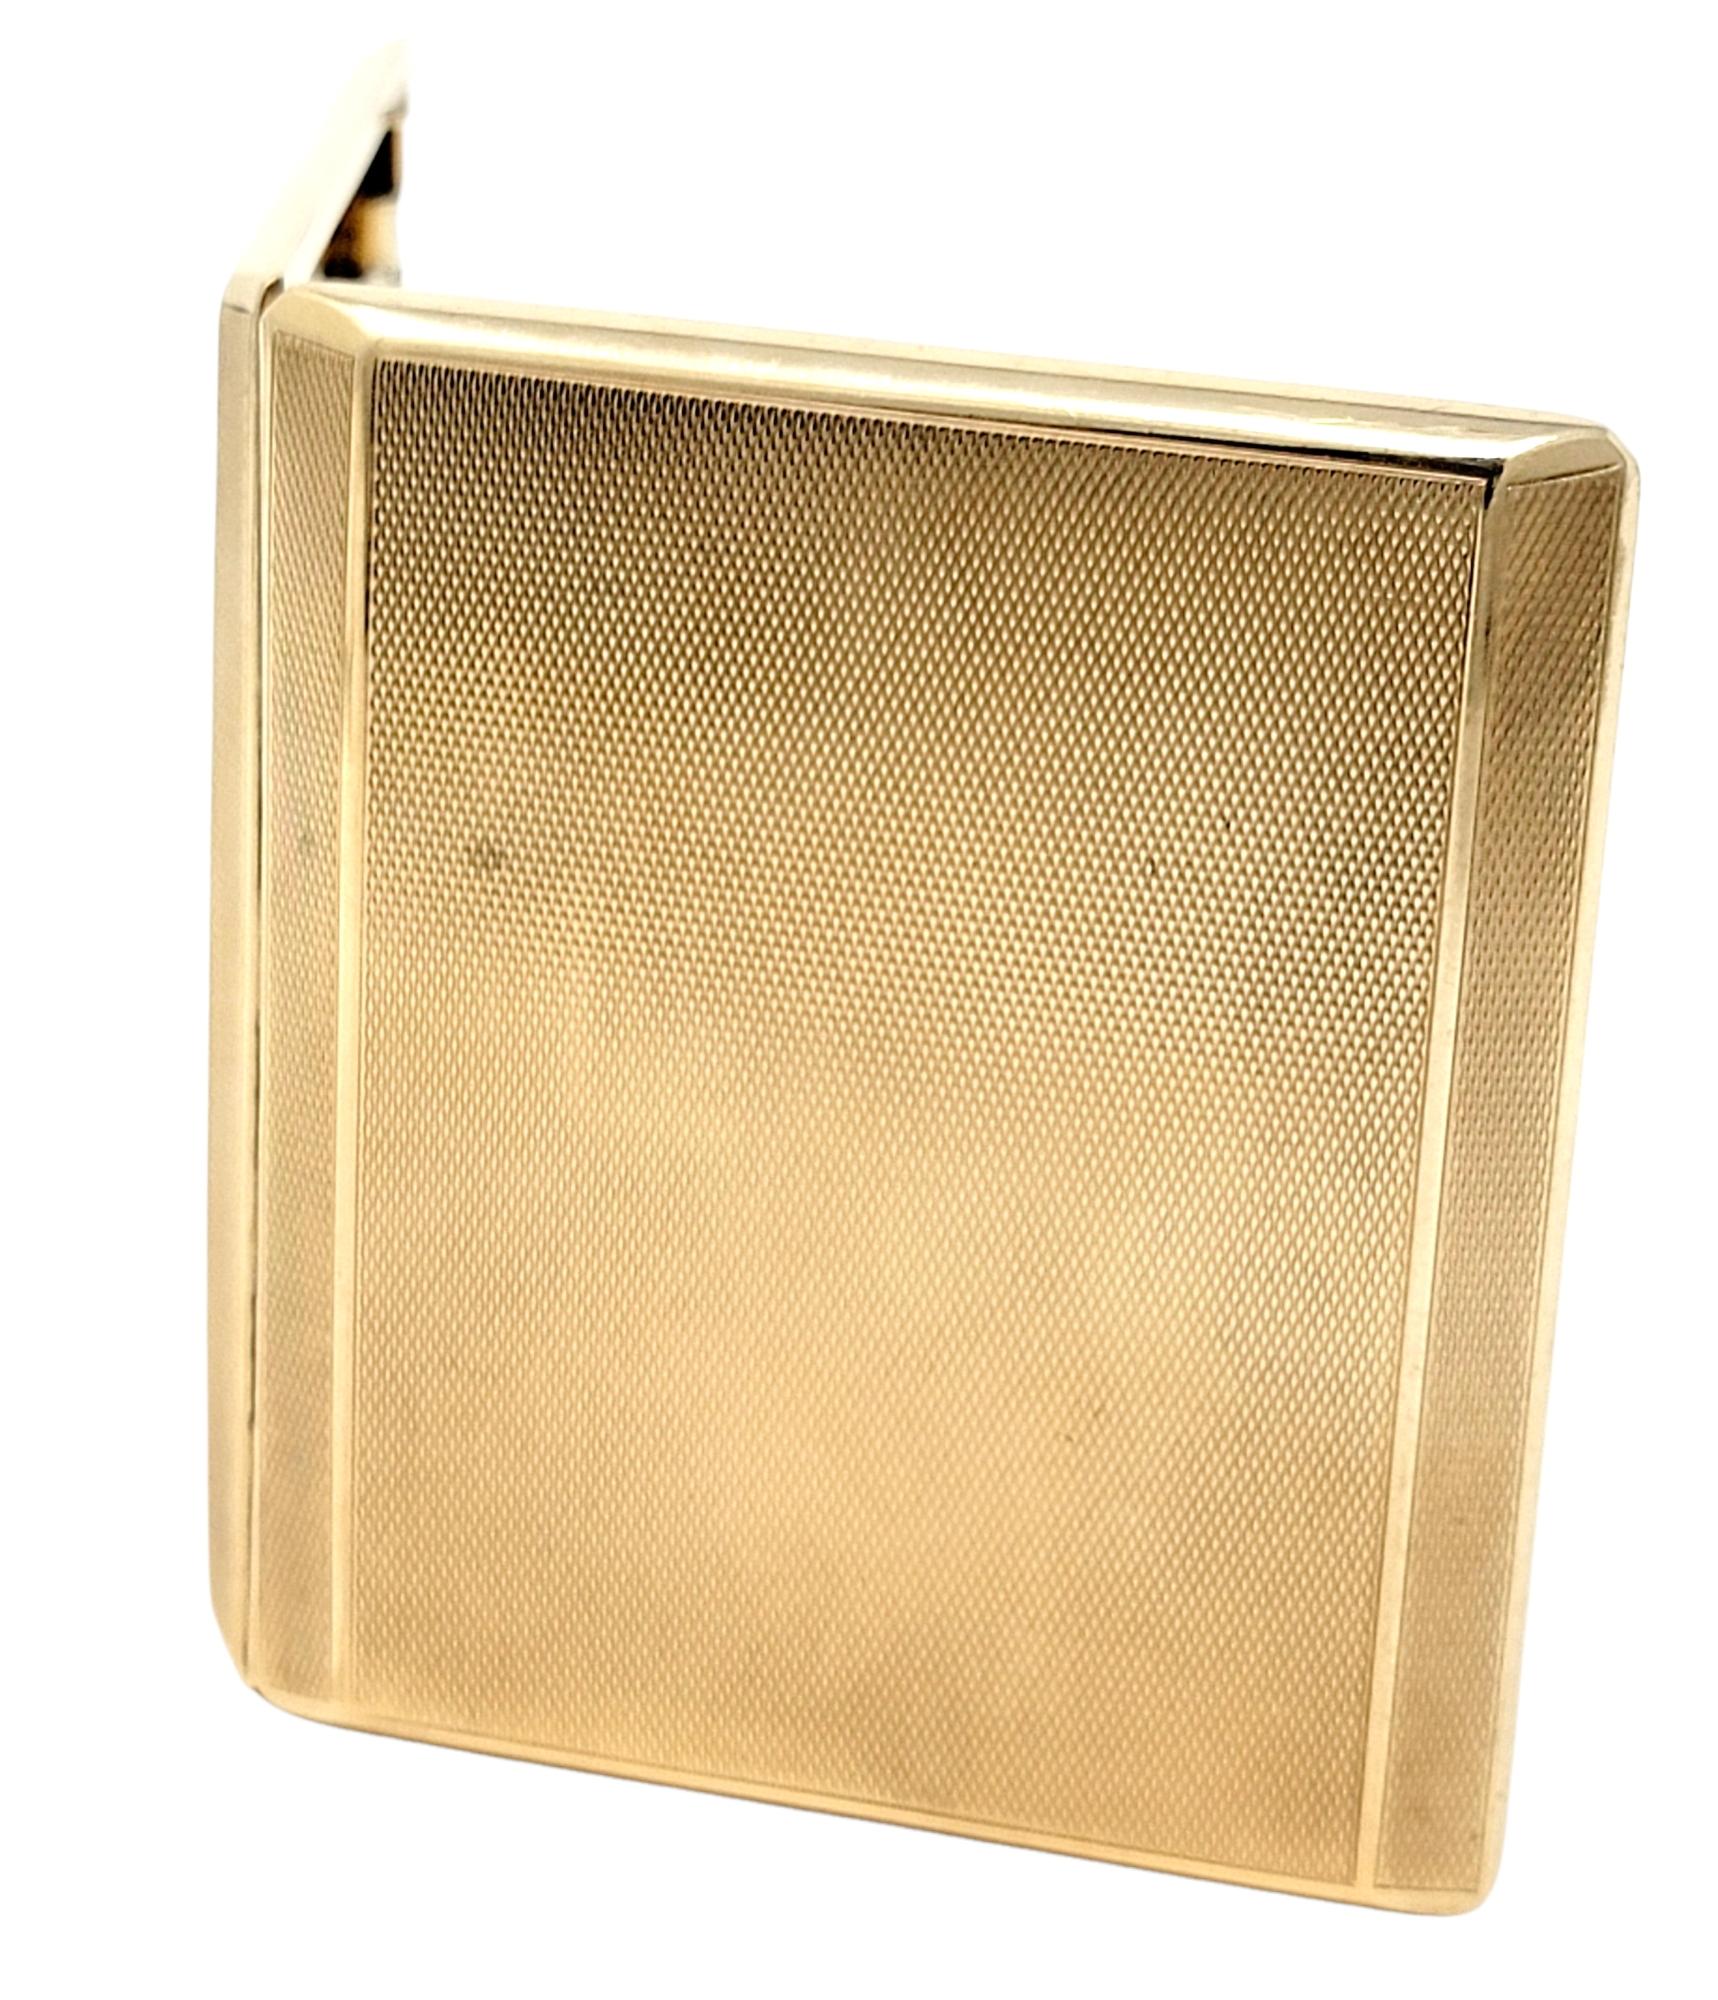 Take home a piece of history! This incredible antique hinged cigarette case is made of solid 9 karat yellow gold and features a finely textured finish throughout with a secure box clasp closure. The sleek, compact design allows for easy access and